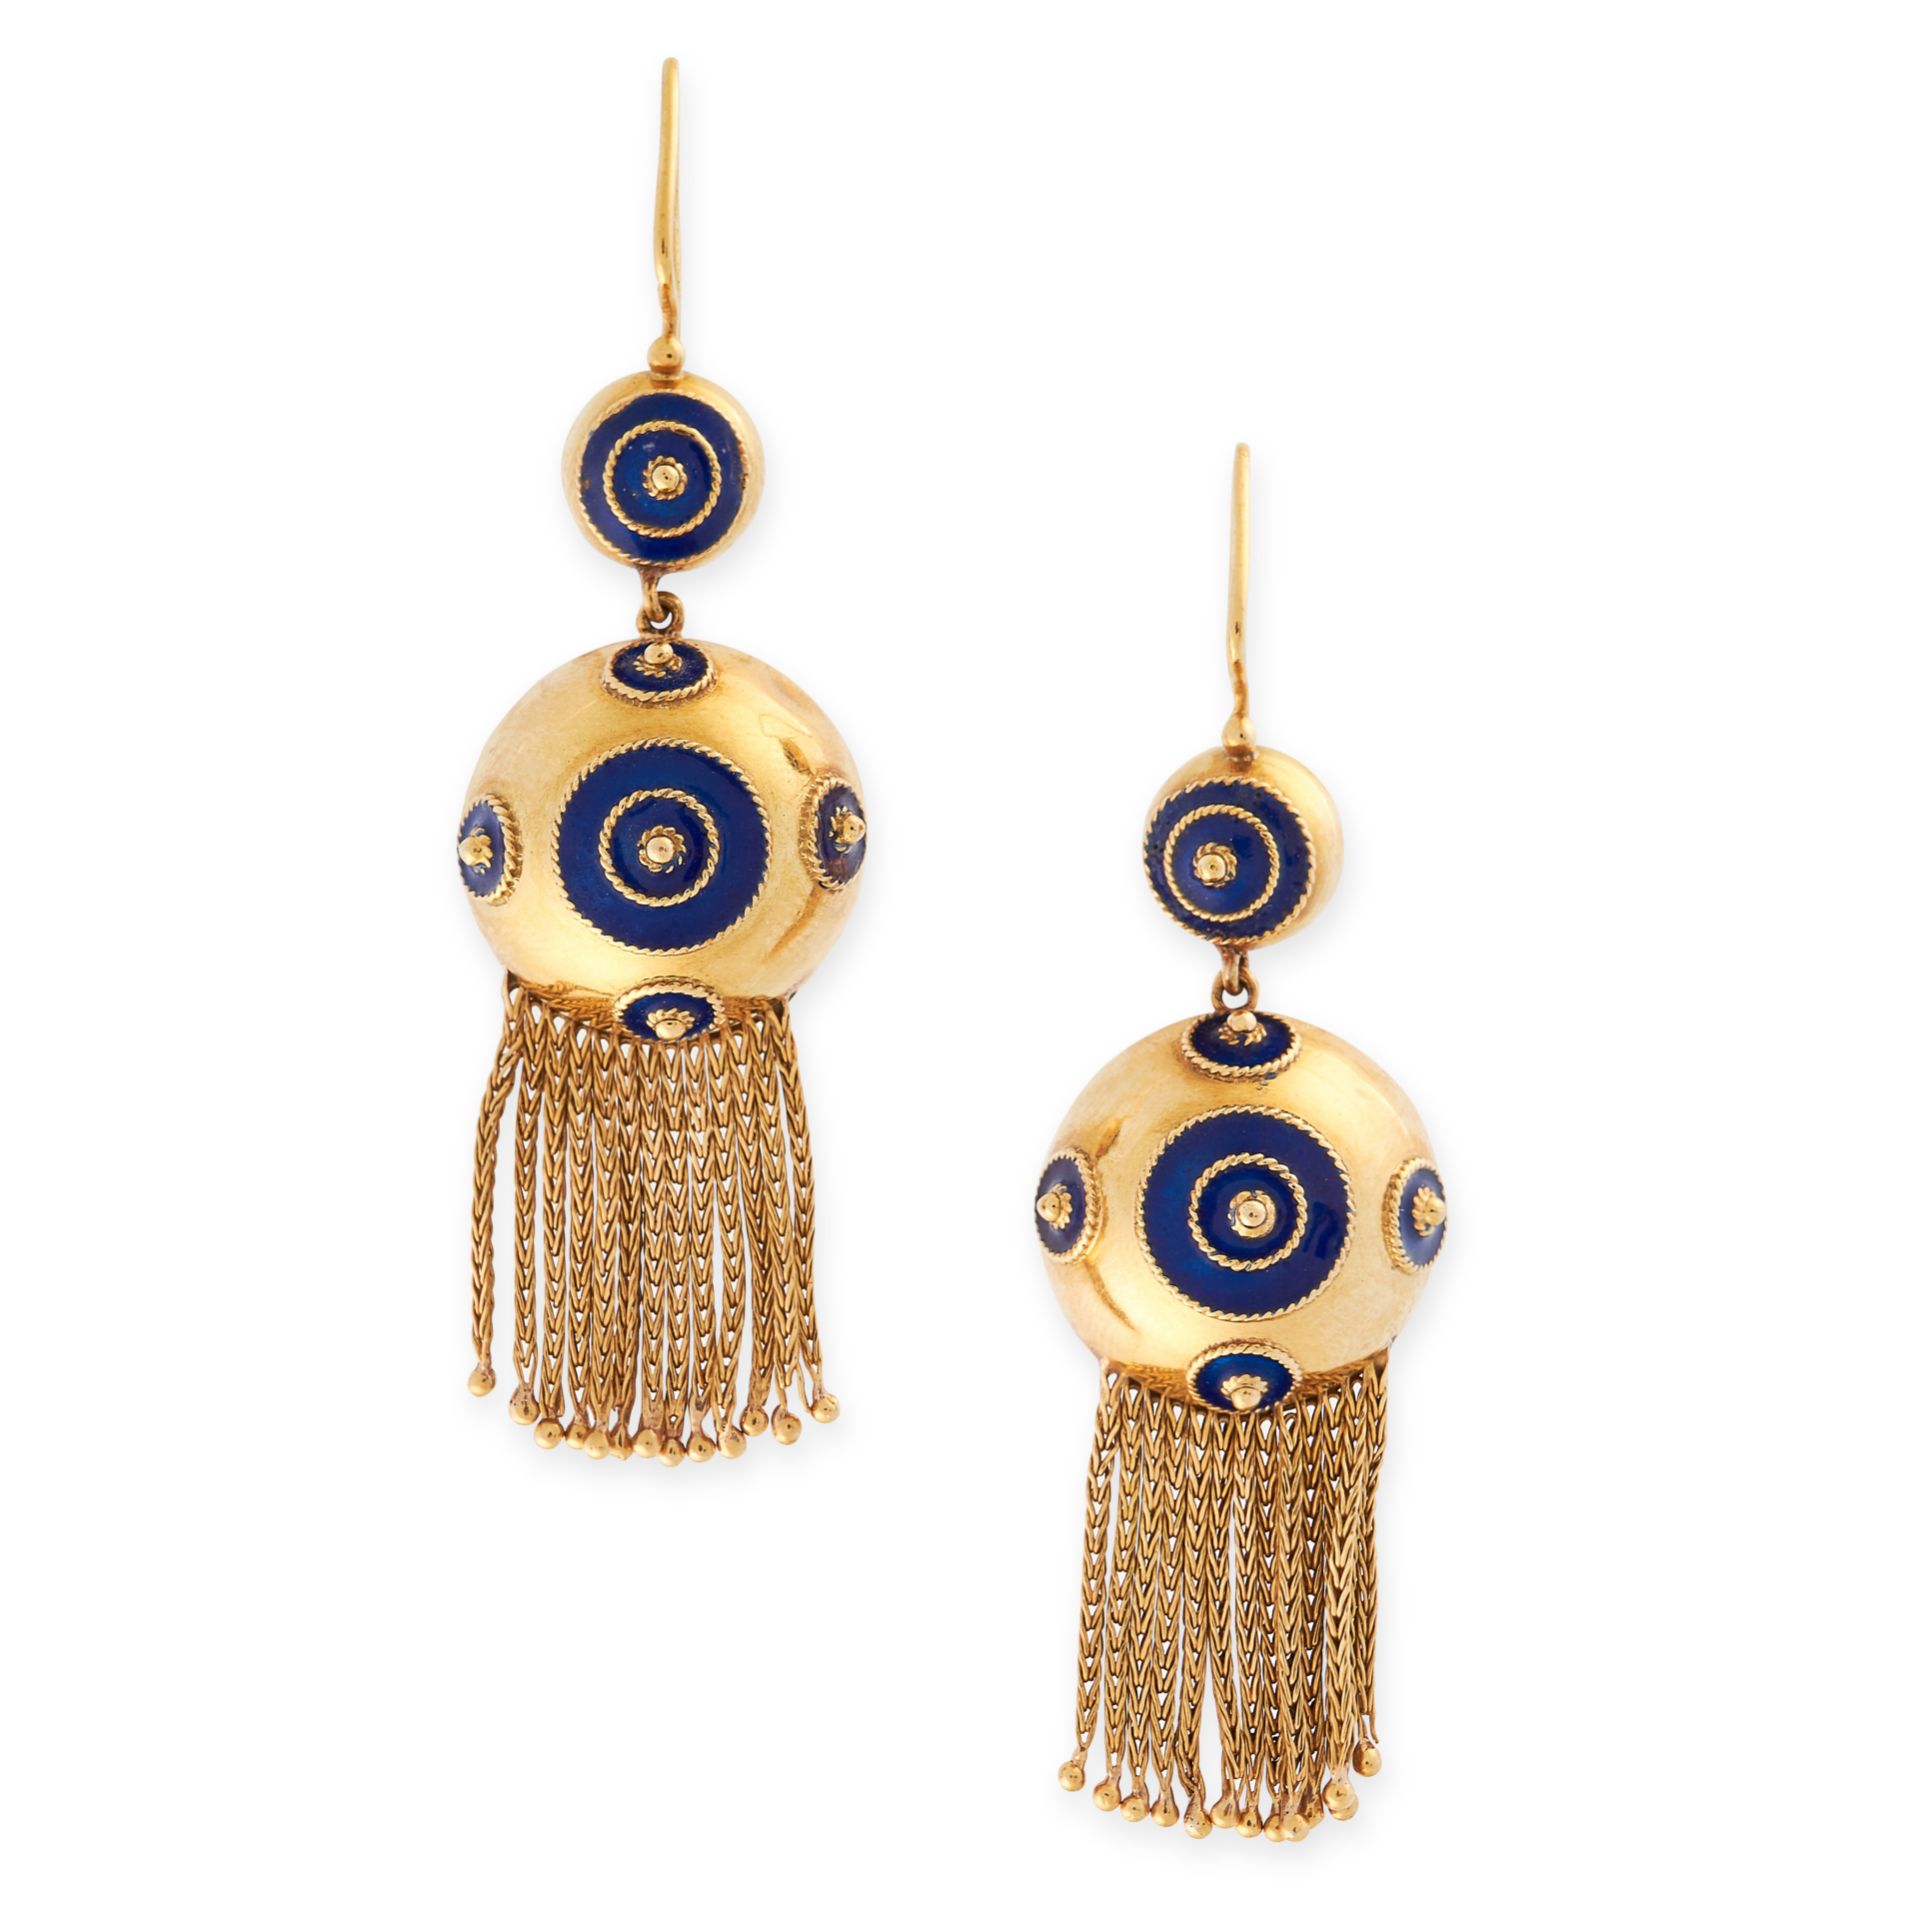 A PAIR OF ENAMEL TASSEL EARRINGS in high carat yellow gold, the bodies formed of graduated